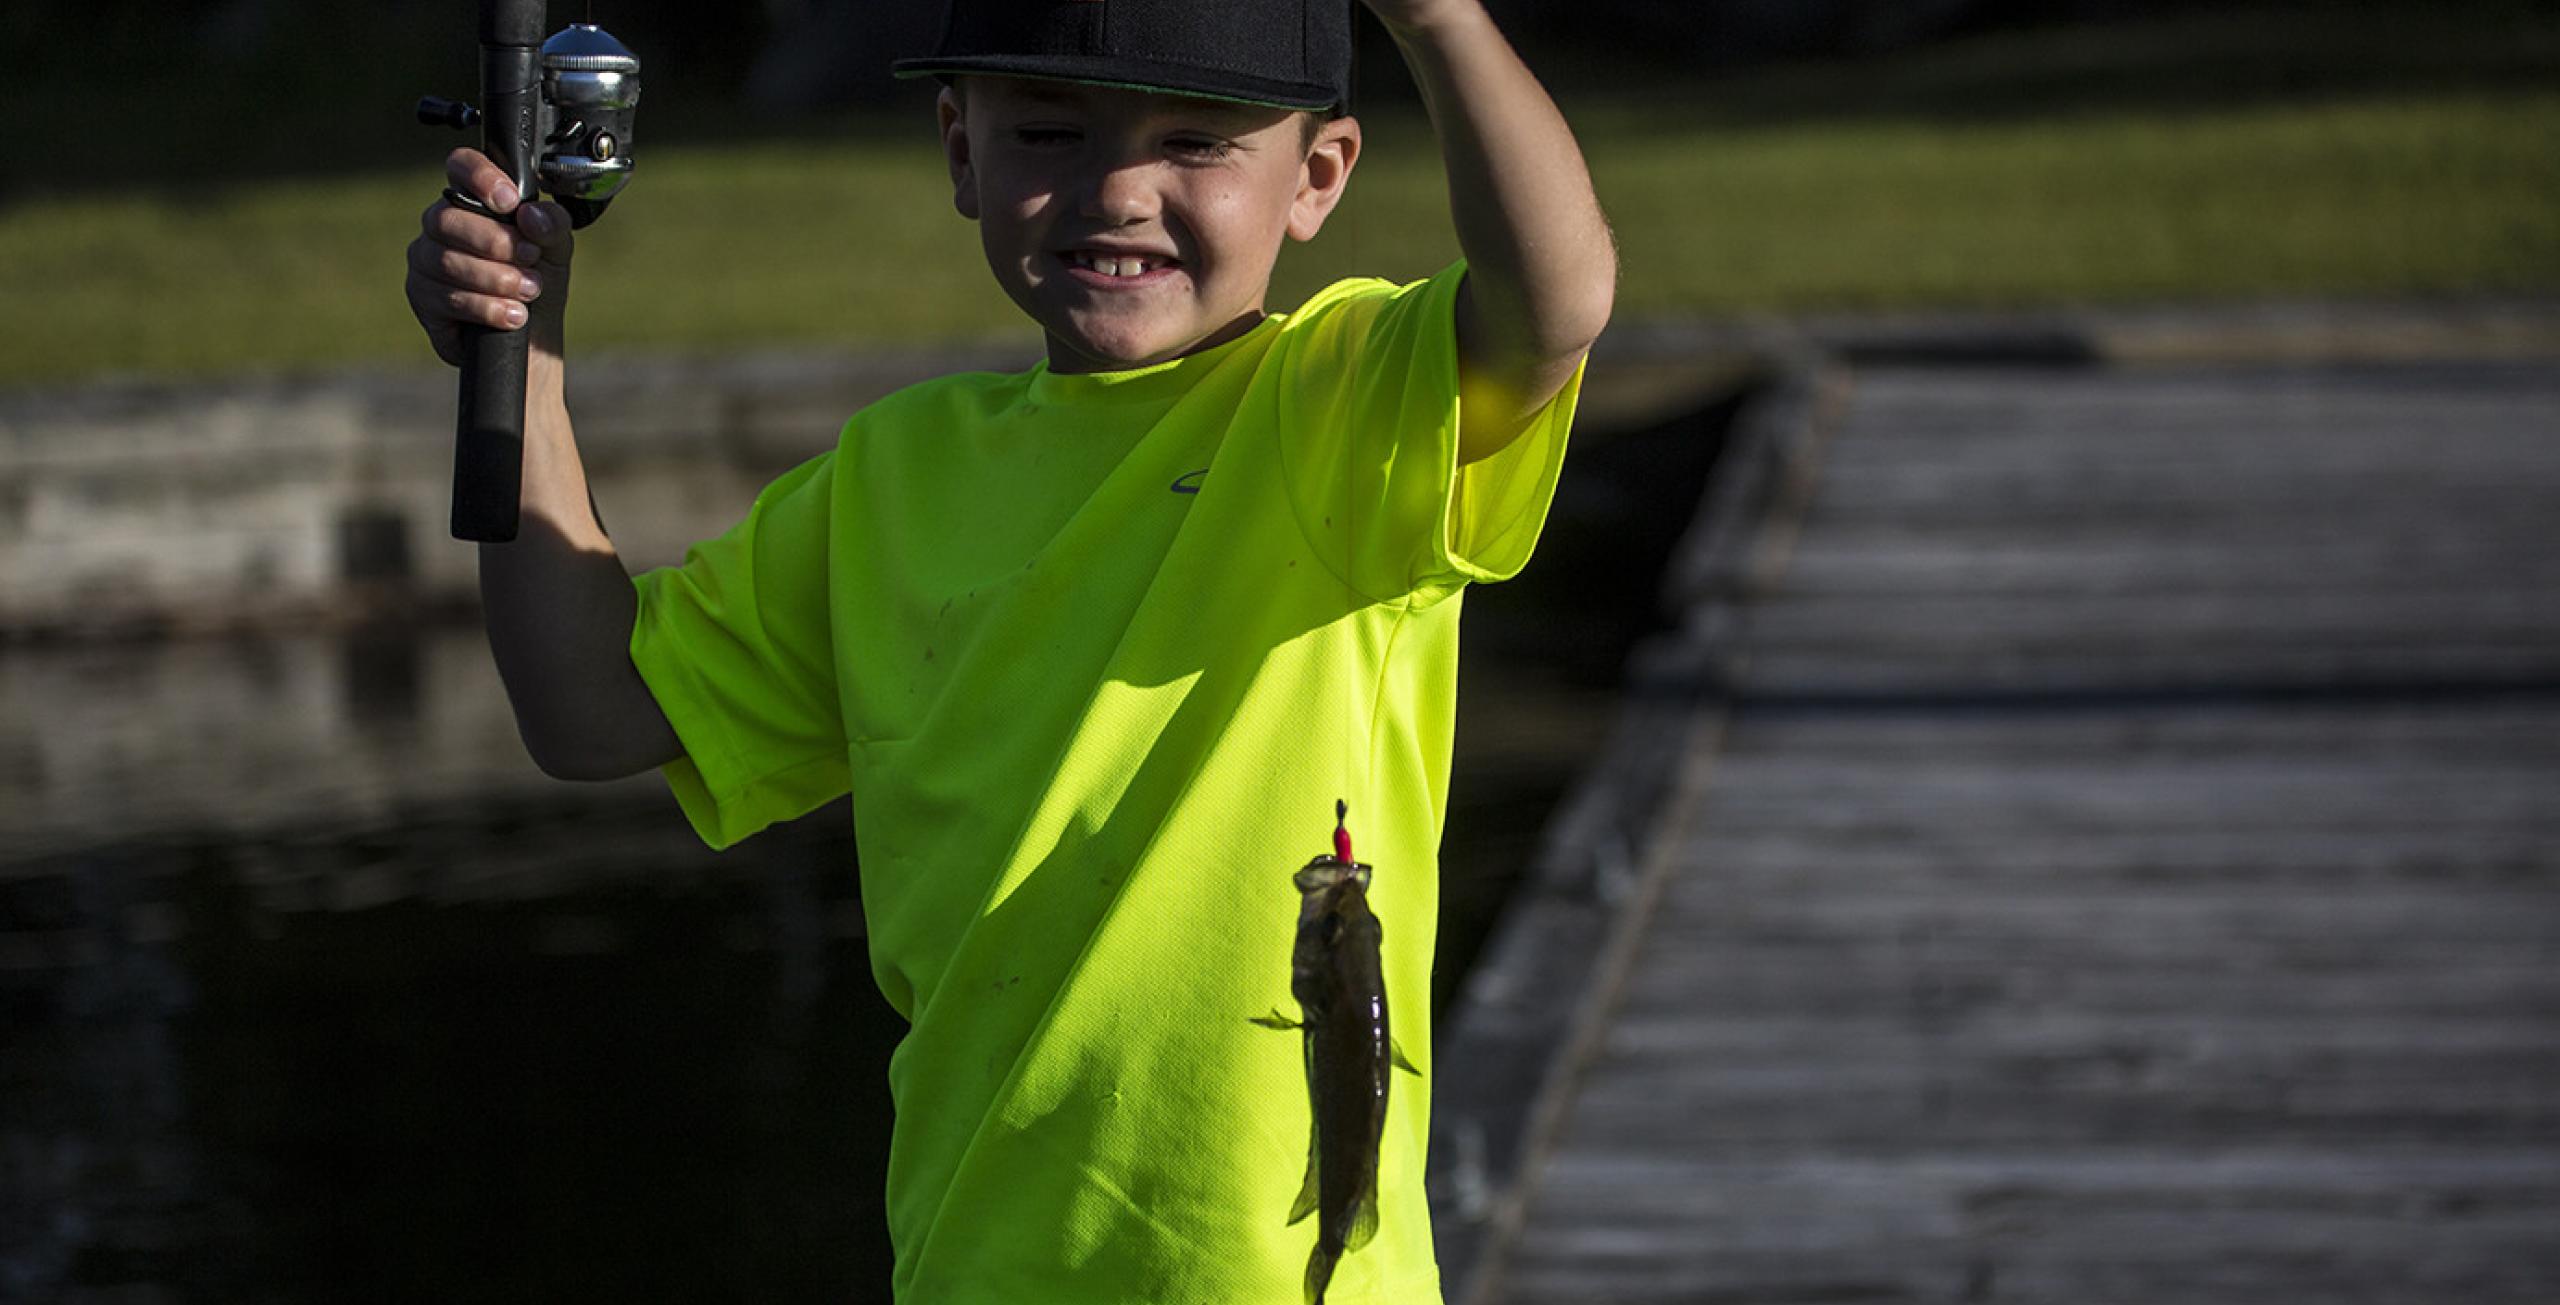 Fishing for a Good Time With Your Kids